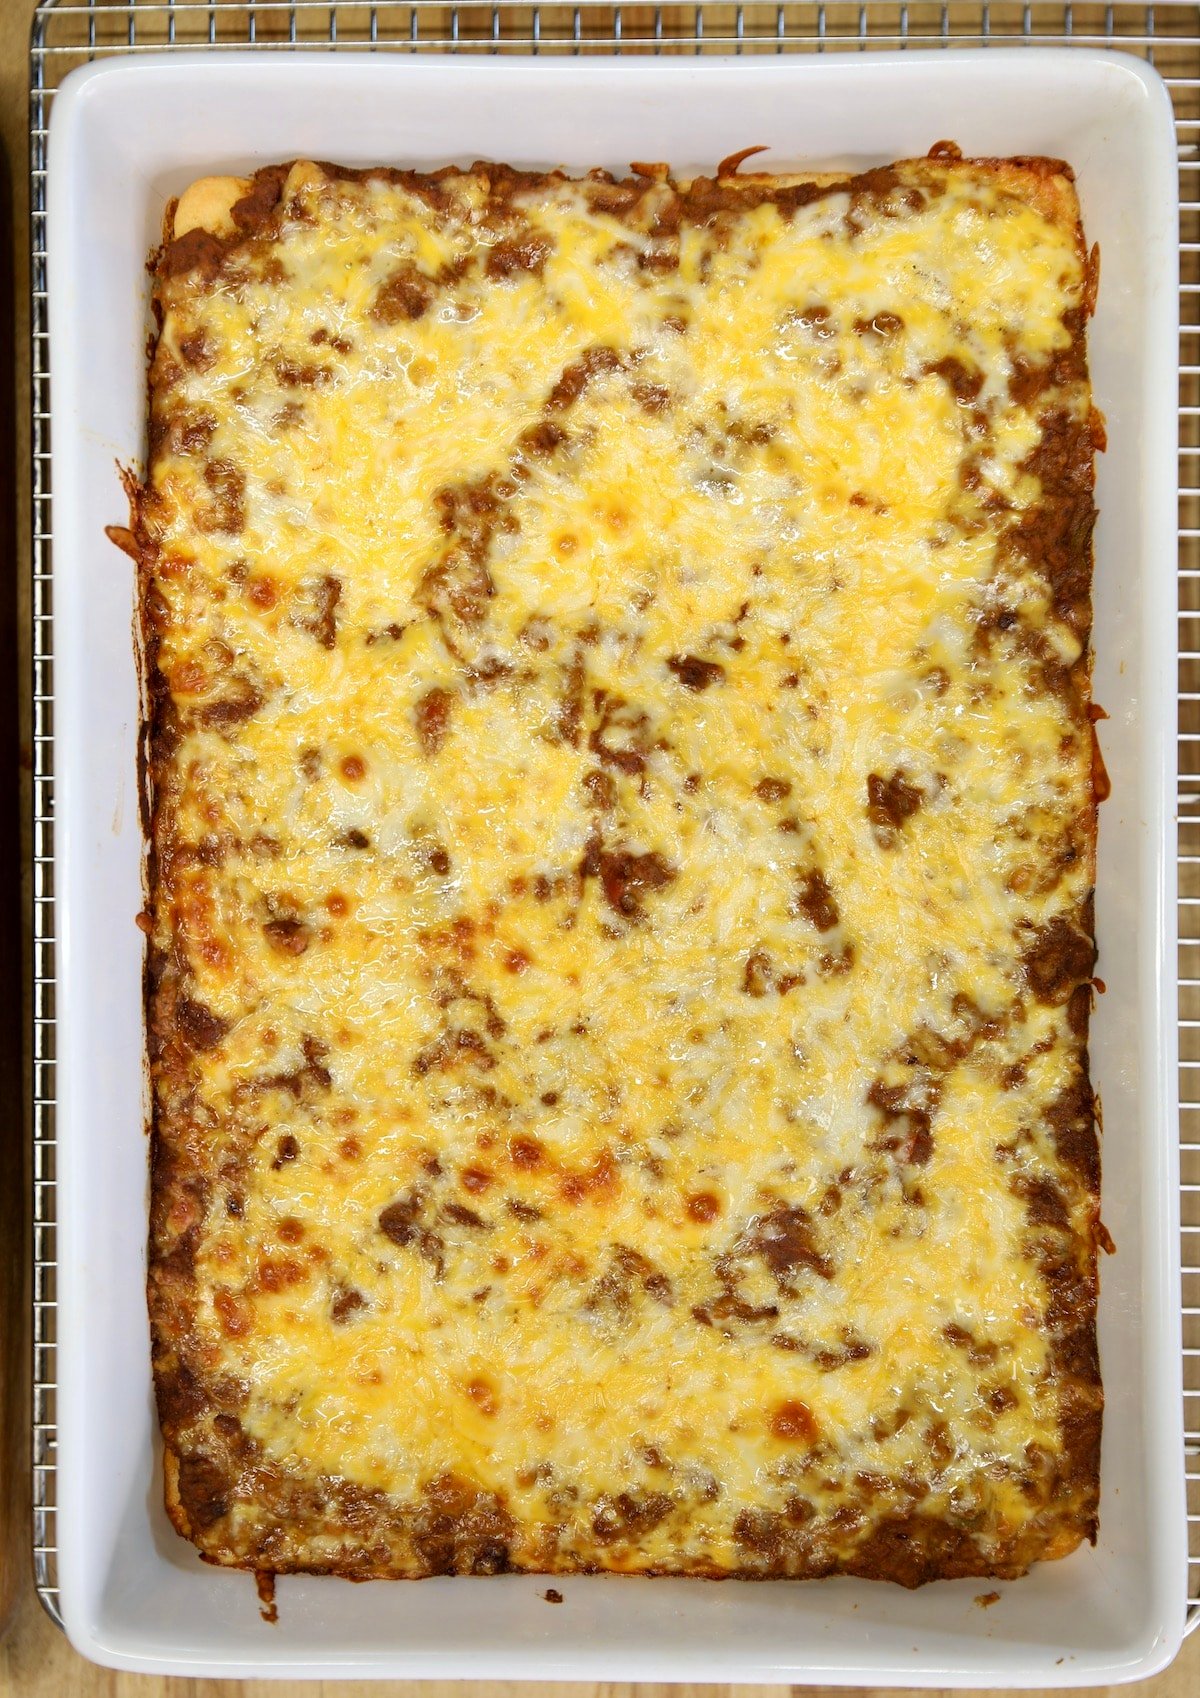 Baked burrito casserole with cheese.